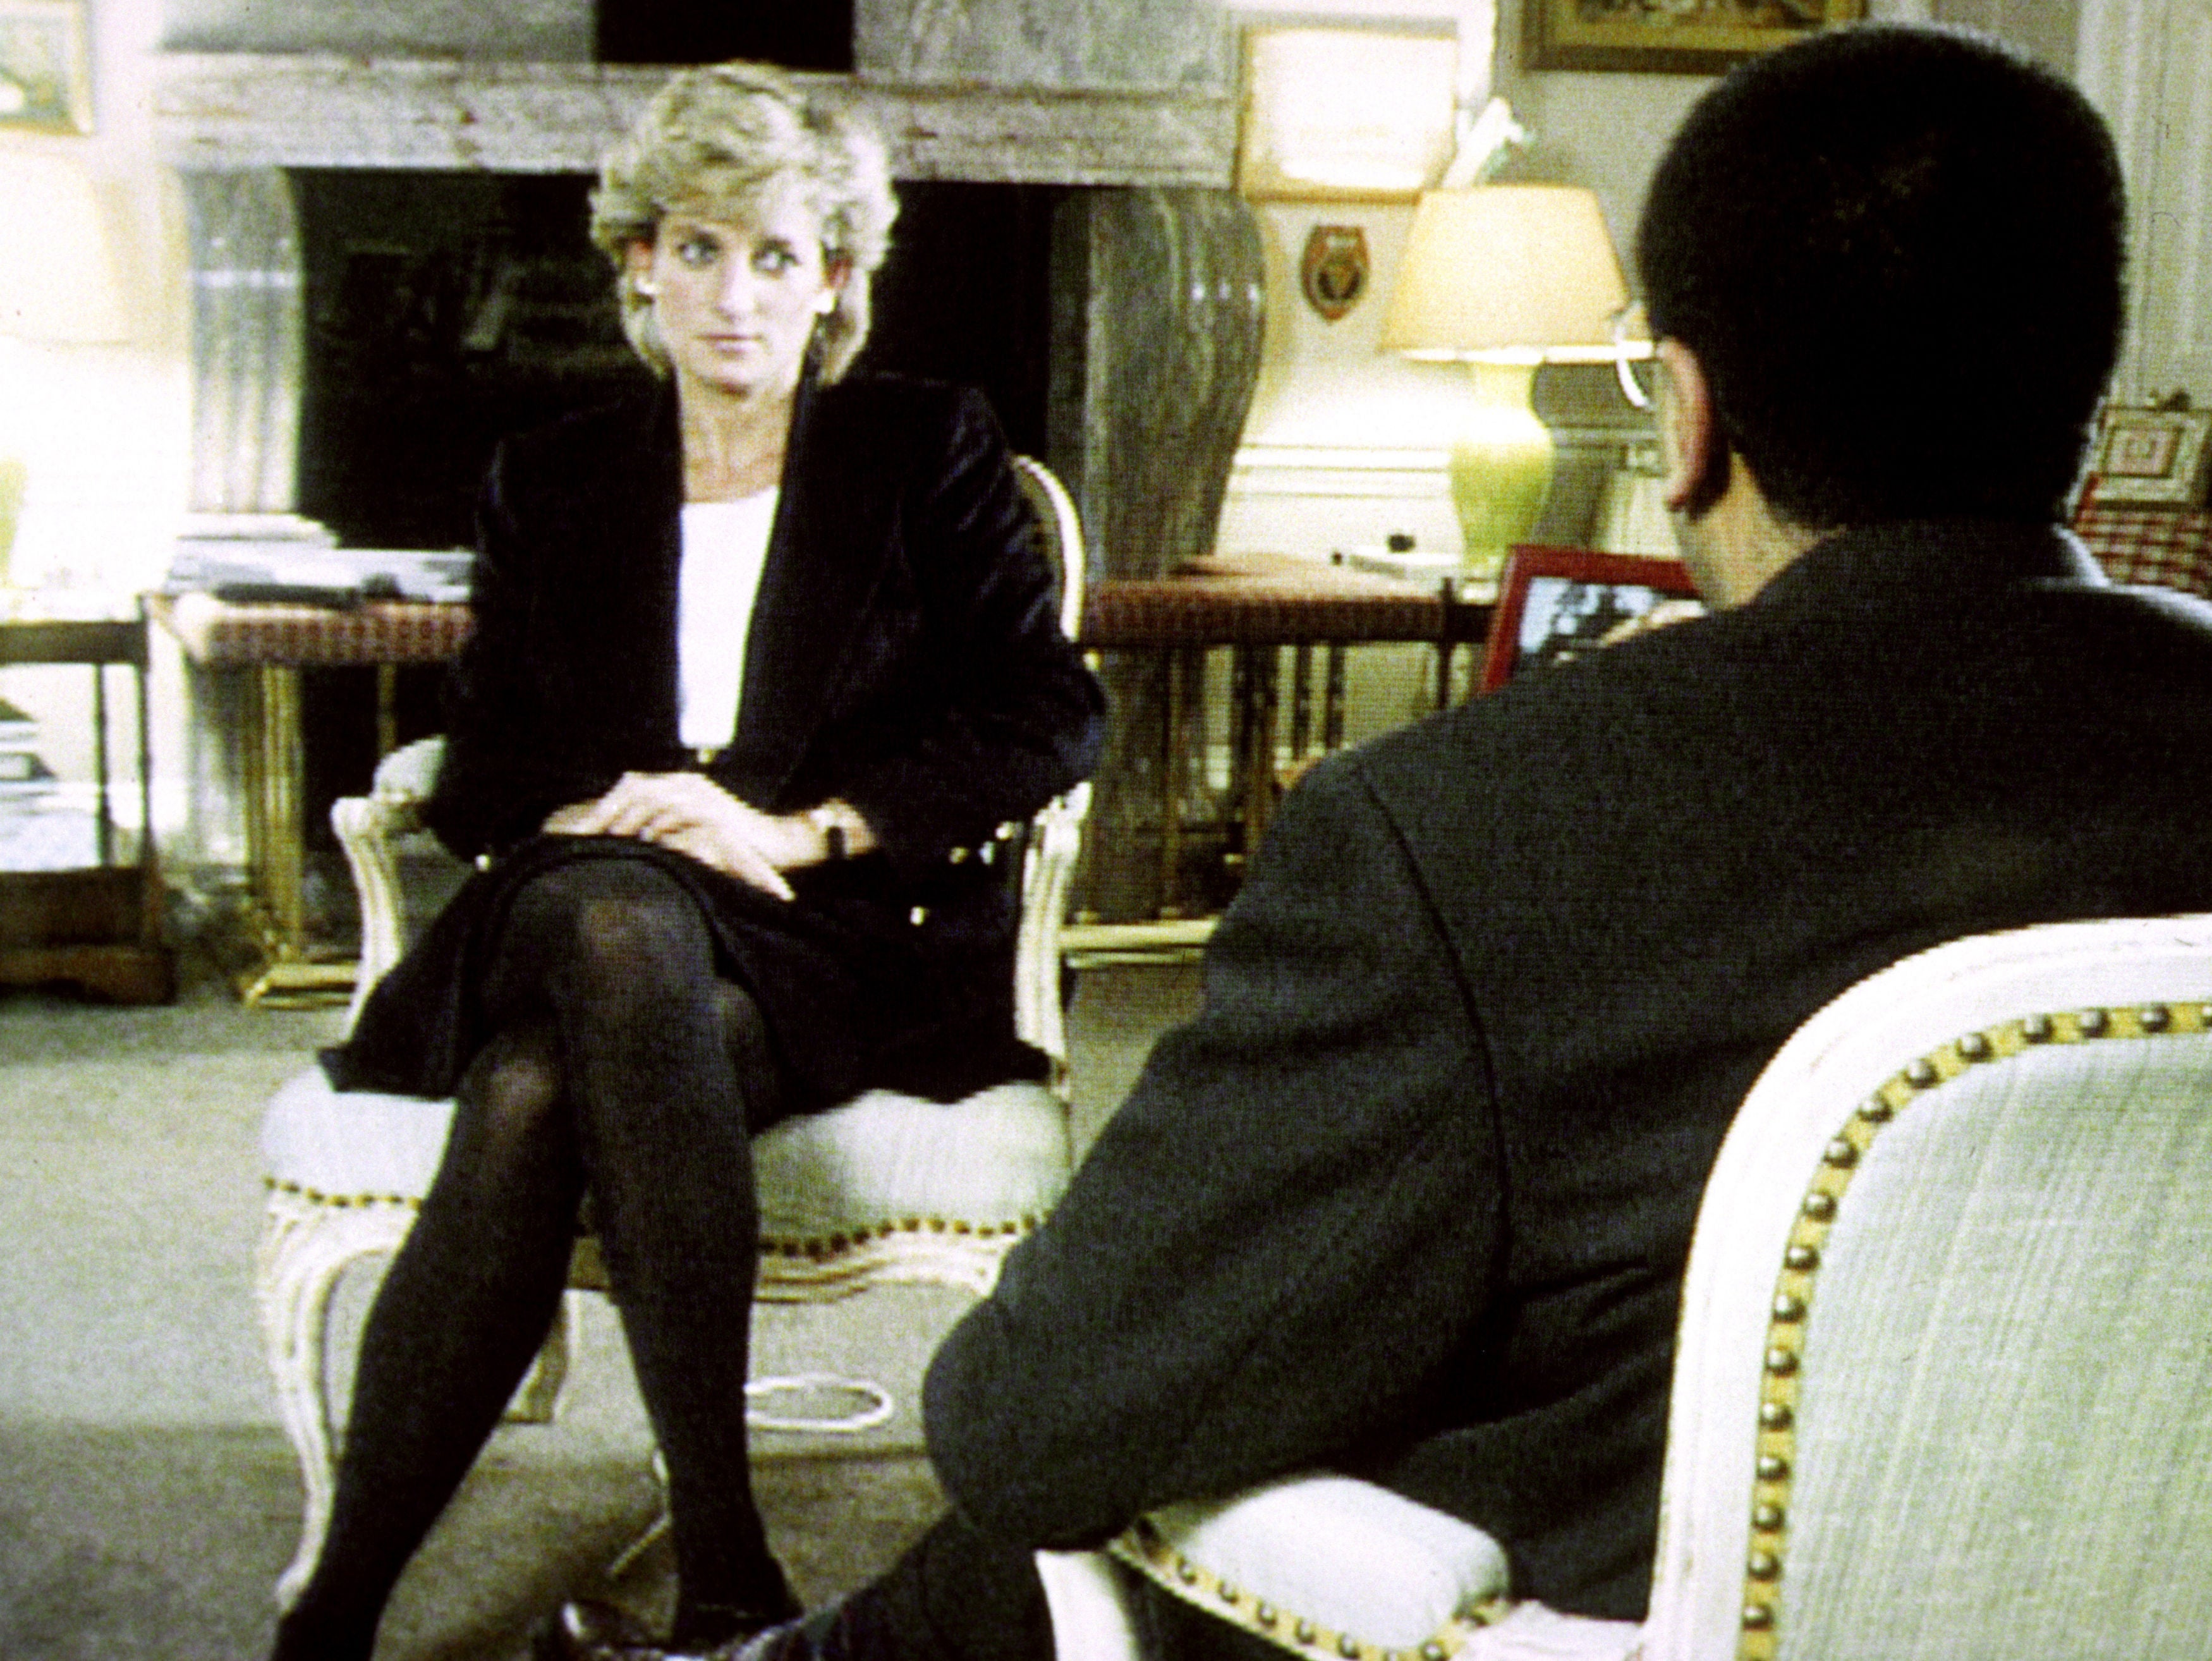 Diana, Princess of Wales, during her interview with Martin Bashir for the BBC (BBC/PA)